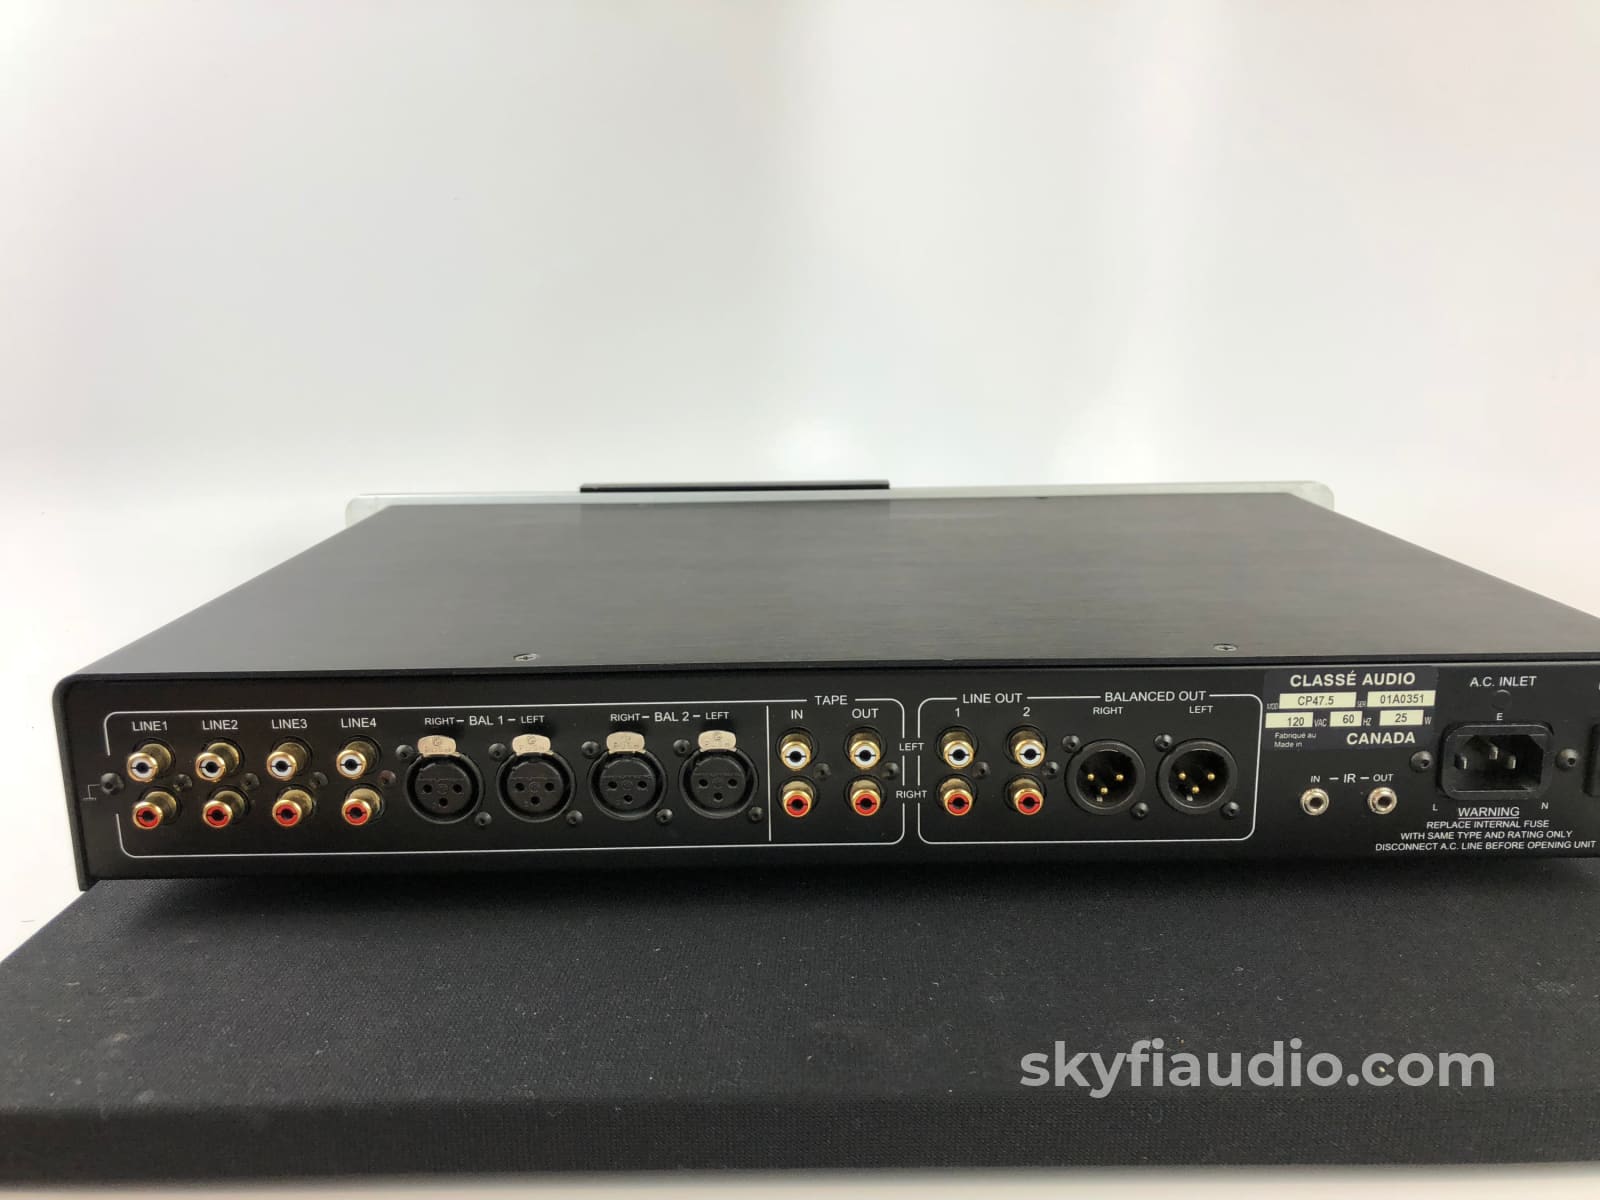 Classe Audio Cp-47.5 Solid State Analog Preamp With Remote Preamplifier